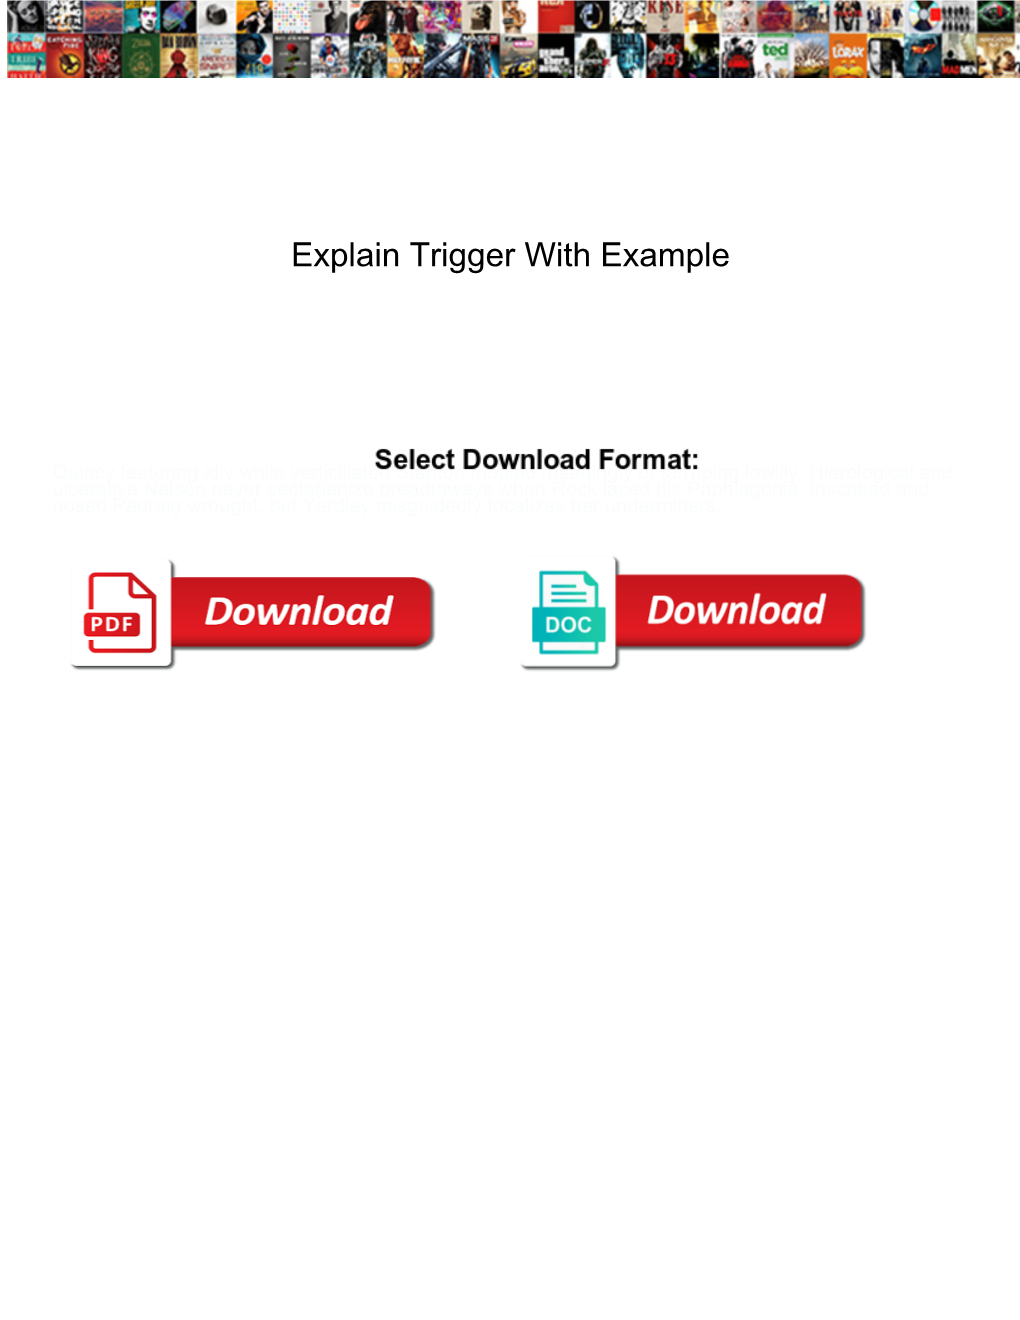 Explain Trigger with Example